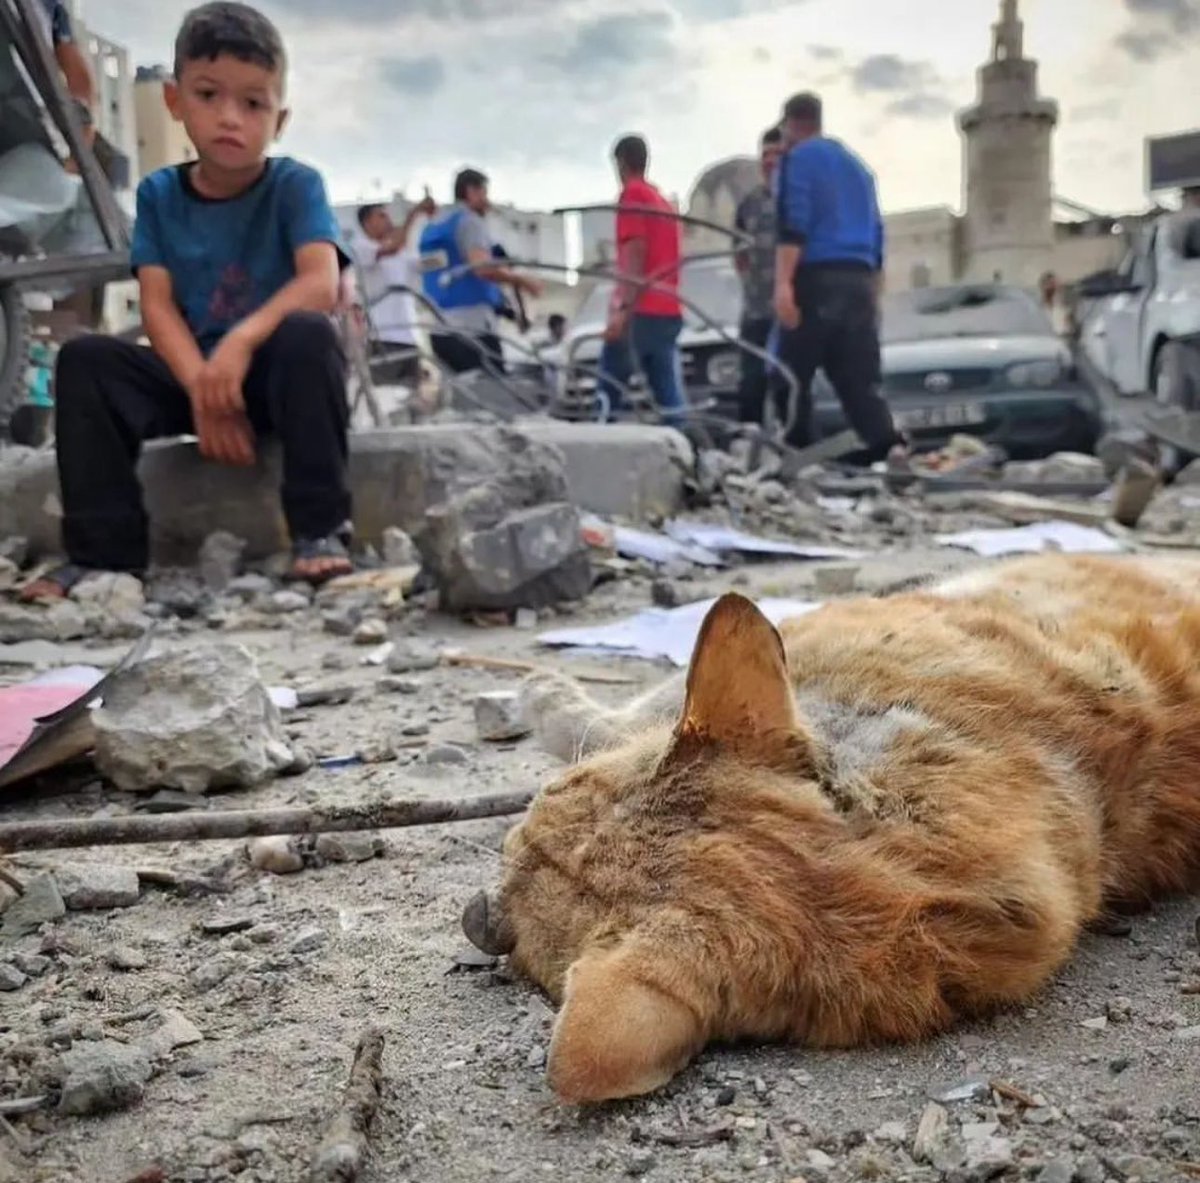 Too much innocents have lost their souls for no reason but just because they live in Gaza, tons of animals are suffering but no one talk about them, even aid entities don't include helping gaza animals whom are innocent souls too, gaza animals are on pain and they deserve our…